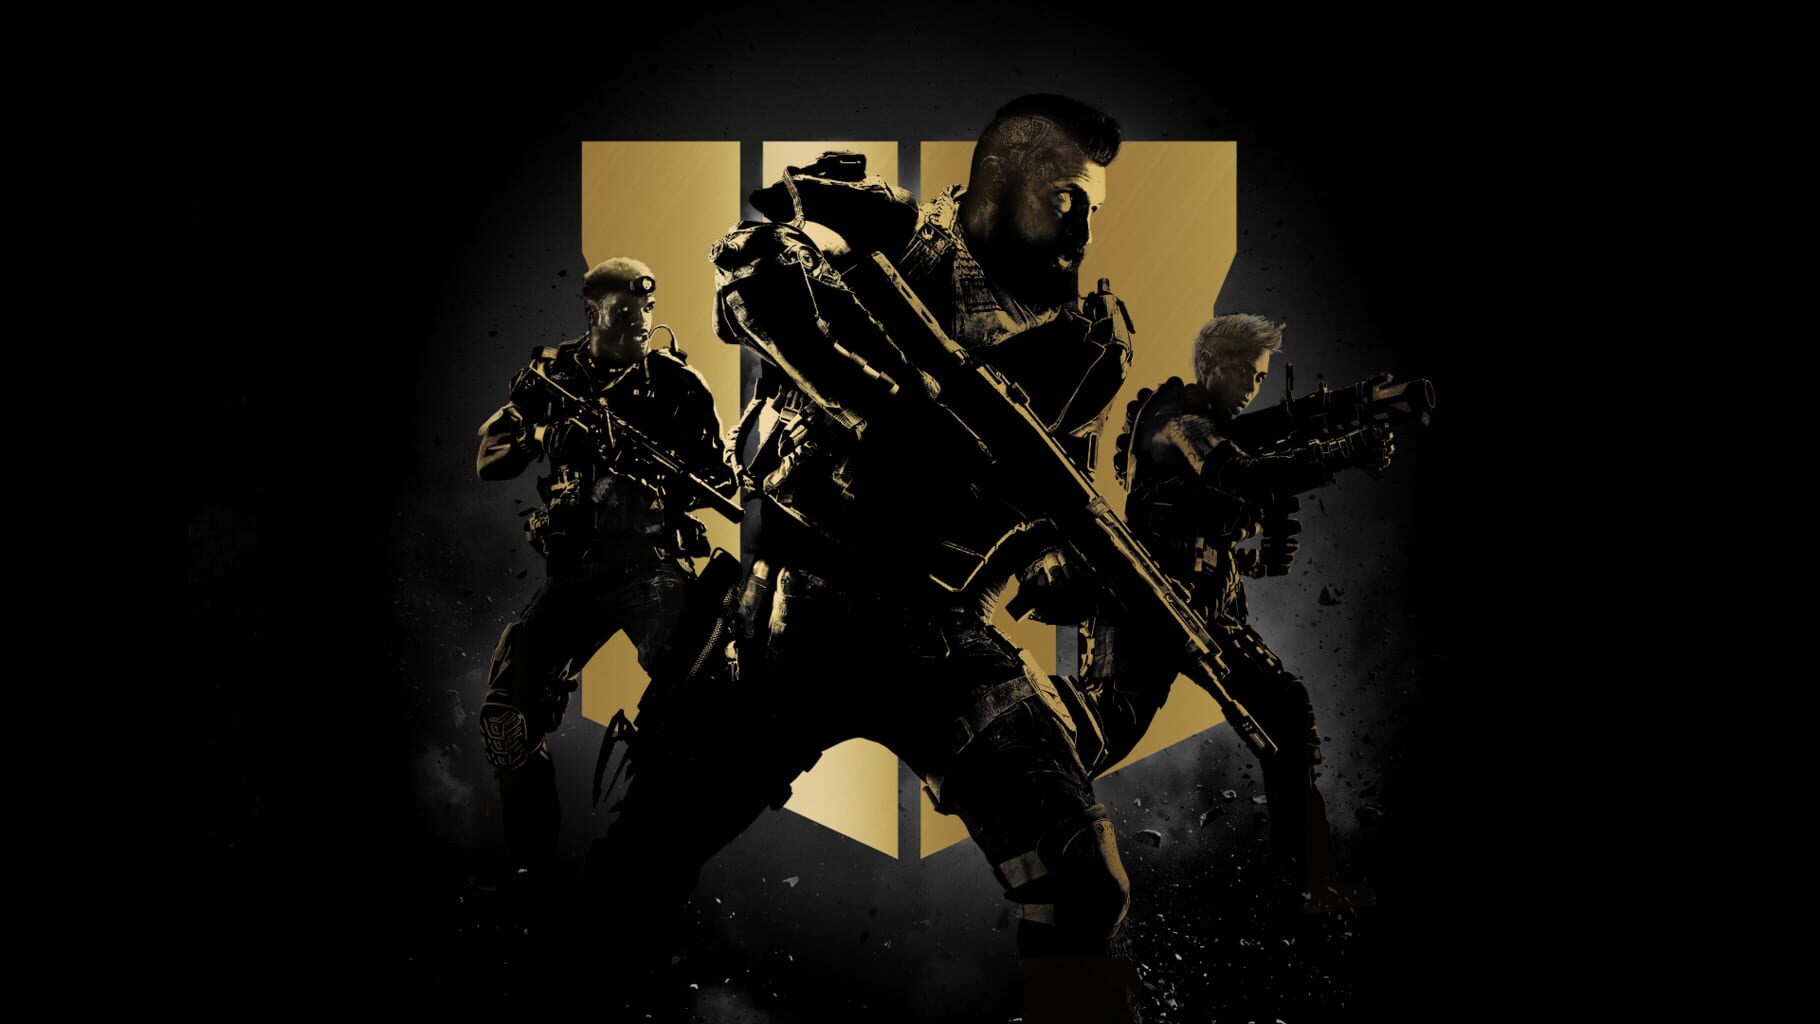 Artwork for Call of Duty: Black Ops 4